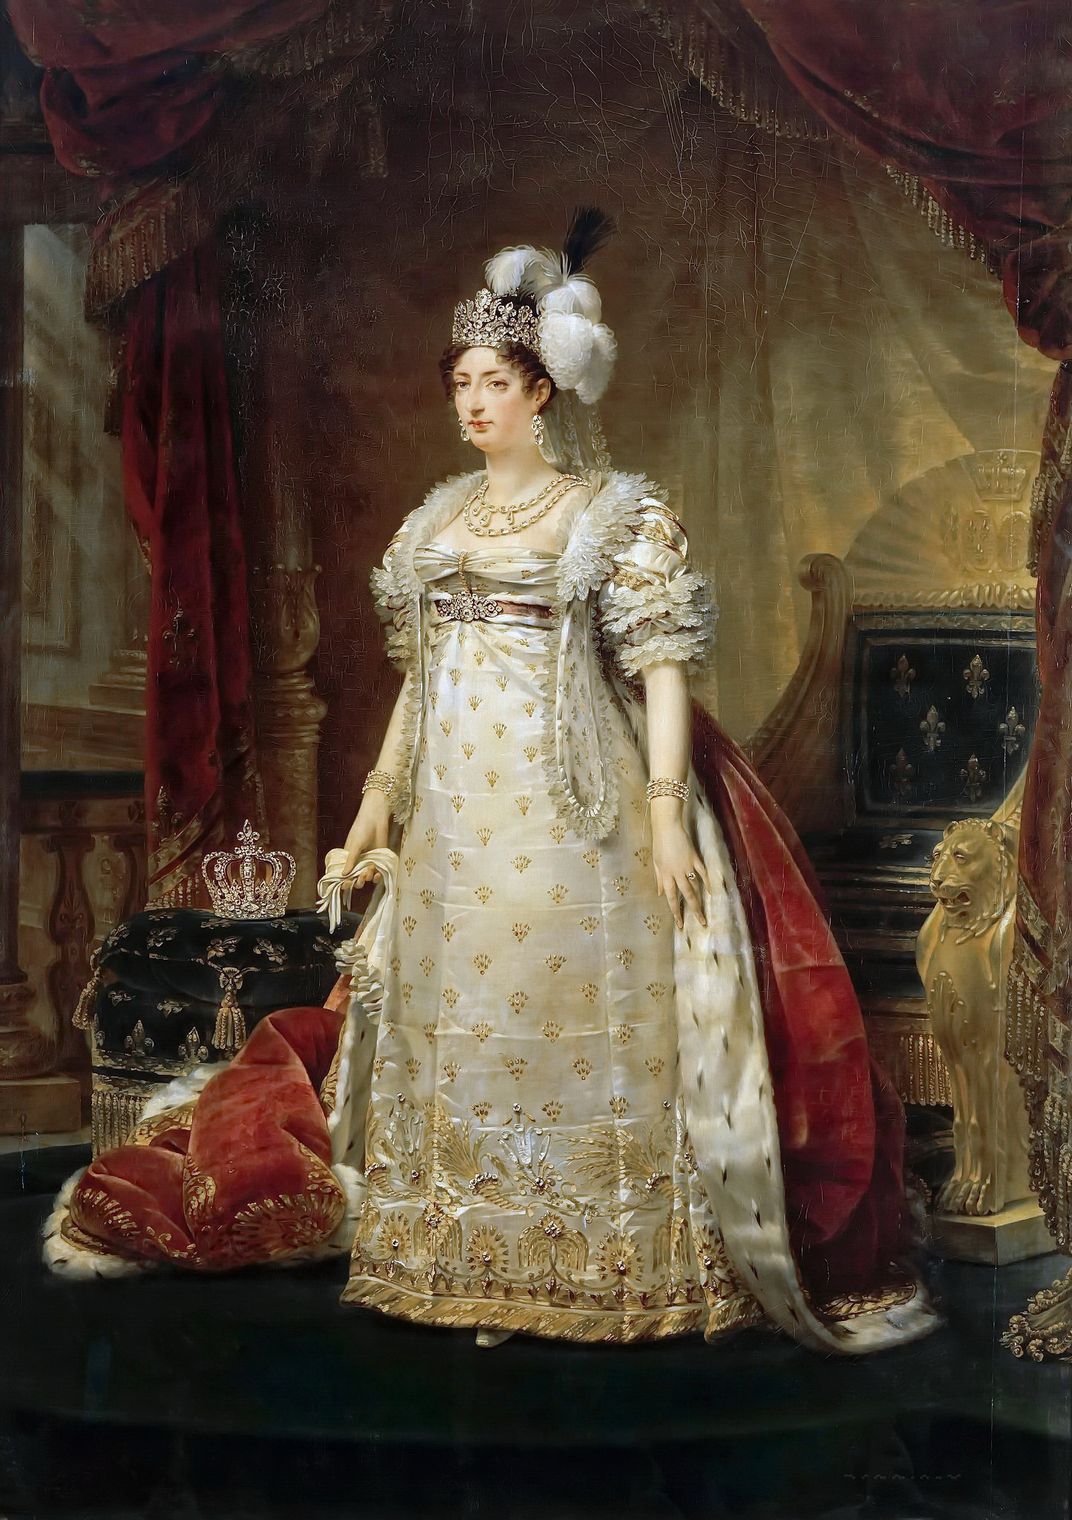 The queen's daughter, Marie-Thérèse Charlotte de France, wears what appear to be her mother's diamond bracelets in this 1816 portrait by Antoine-Jean Gros.